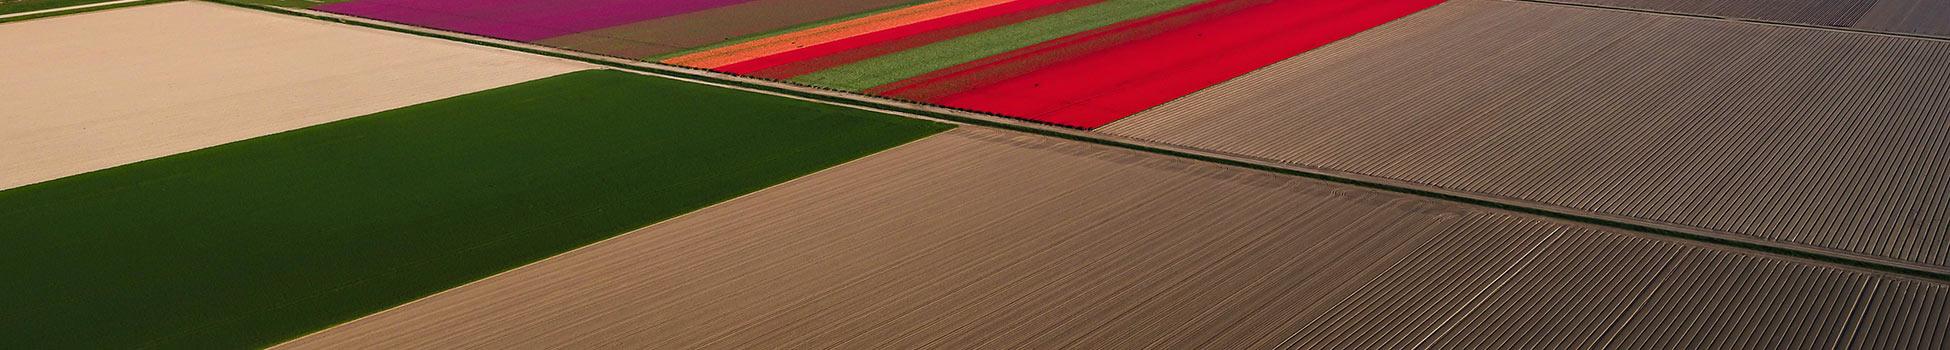 Colourful fields